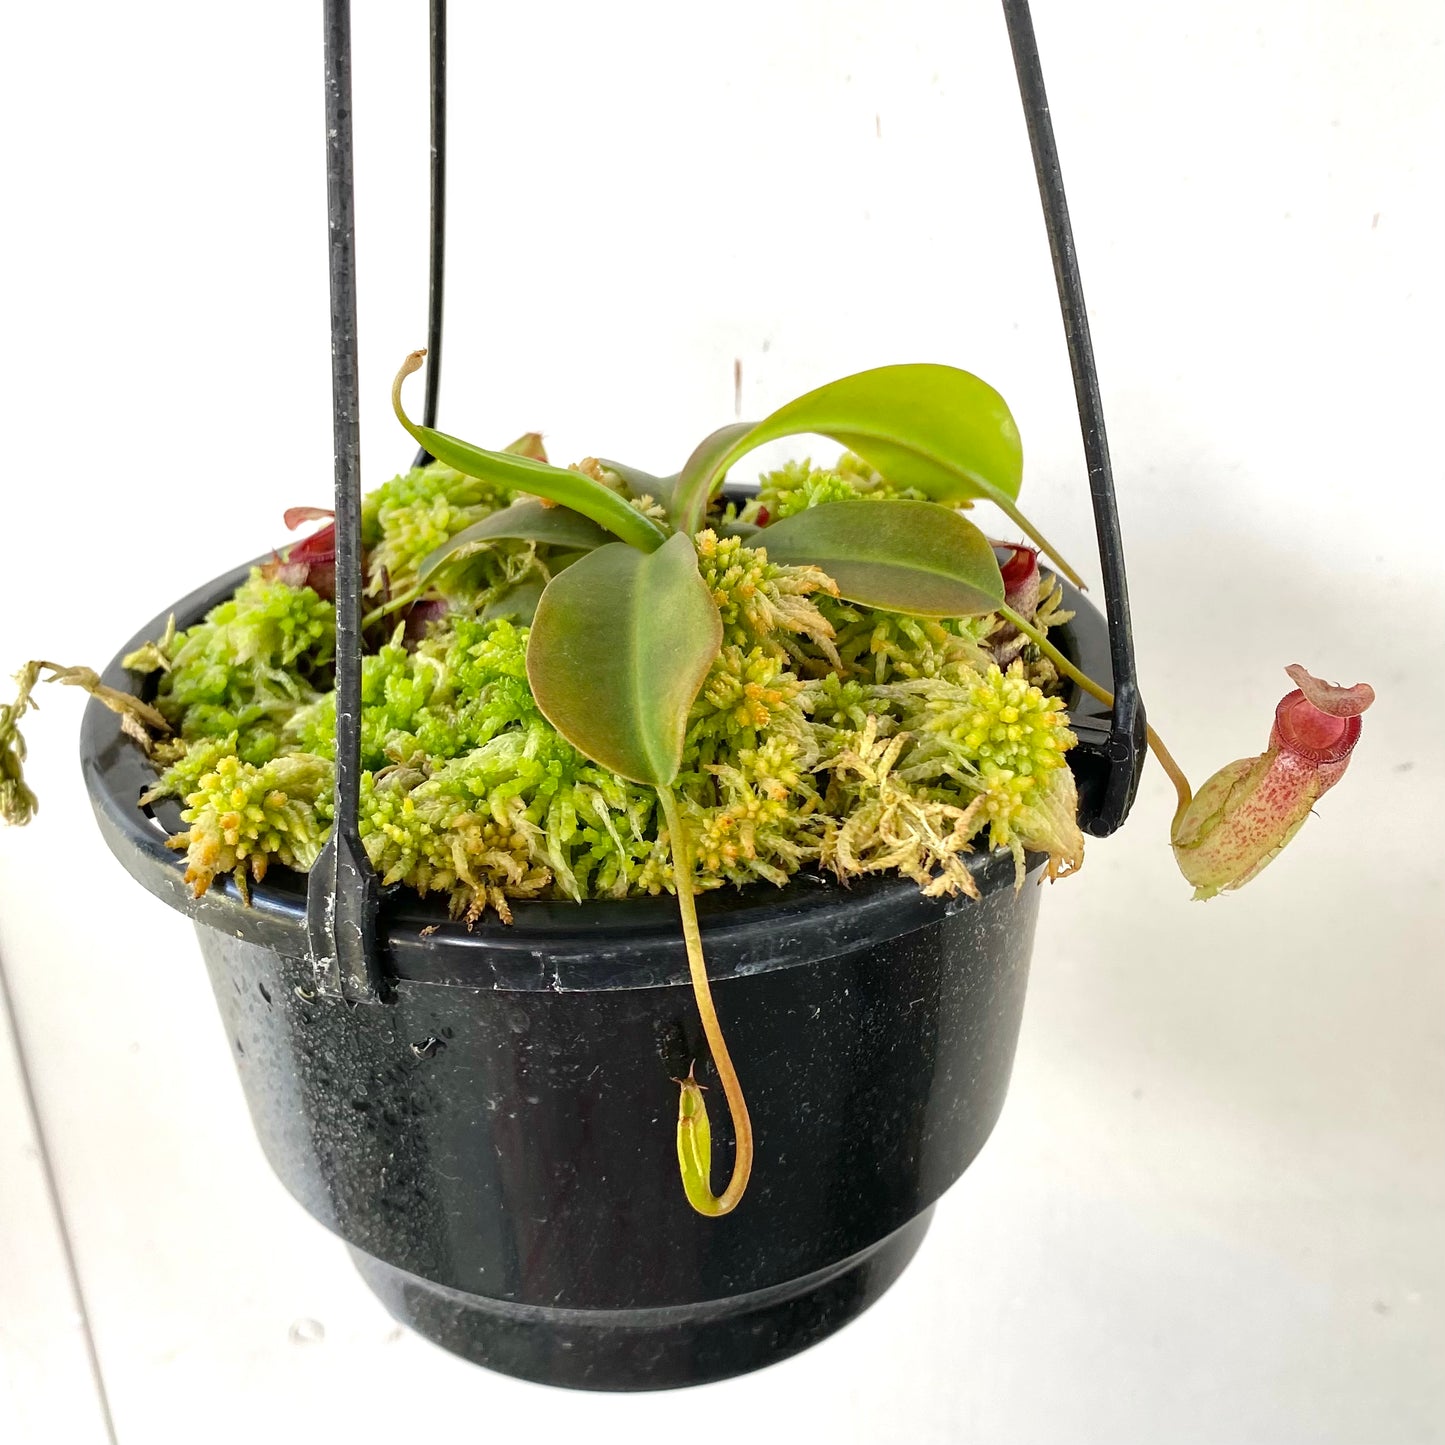 Nepenthes “Mimi’s Kiss”